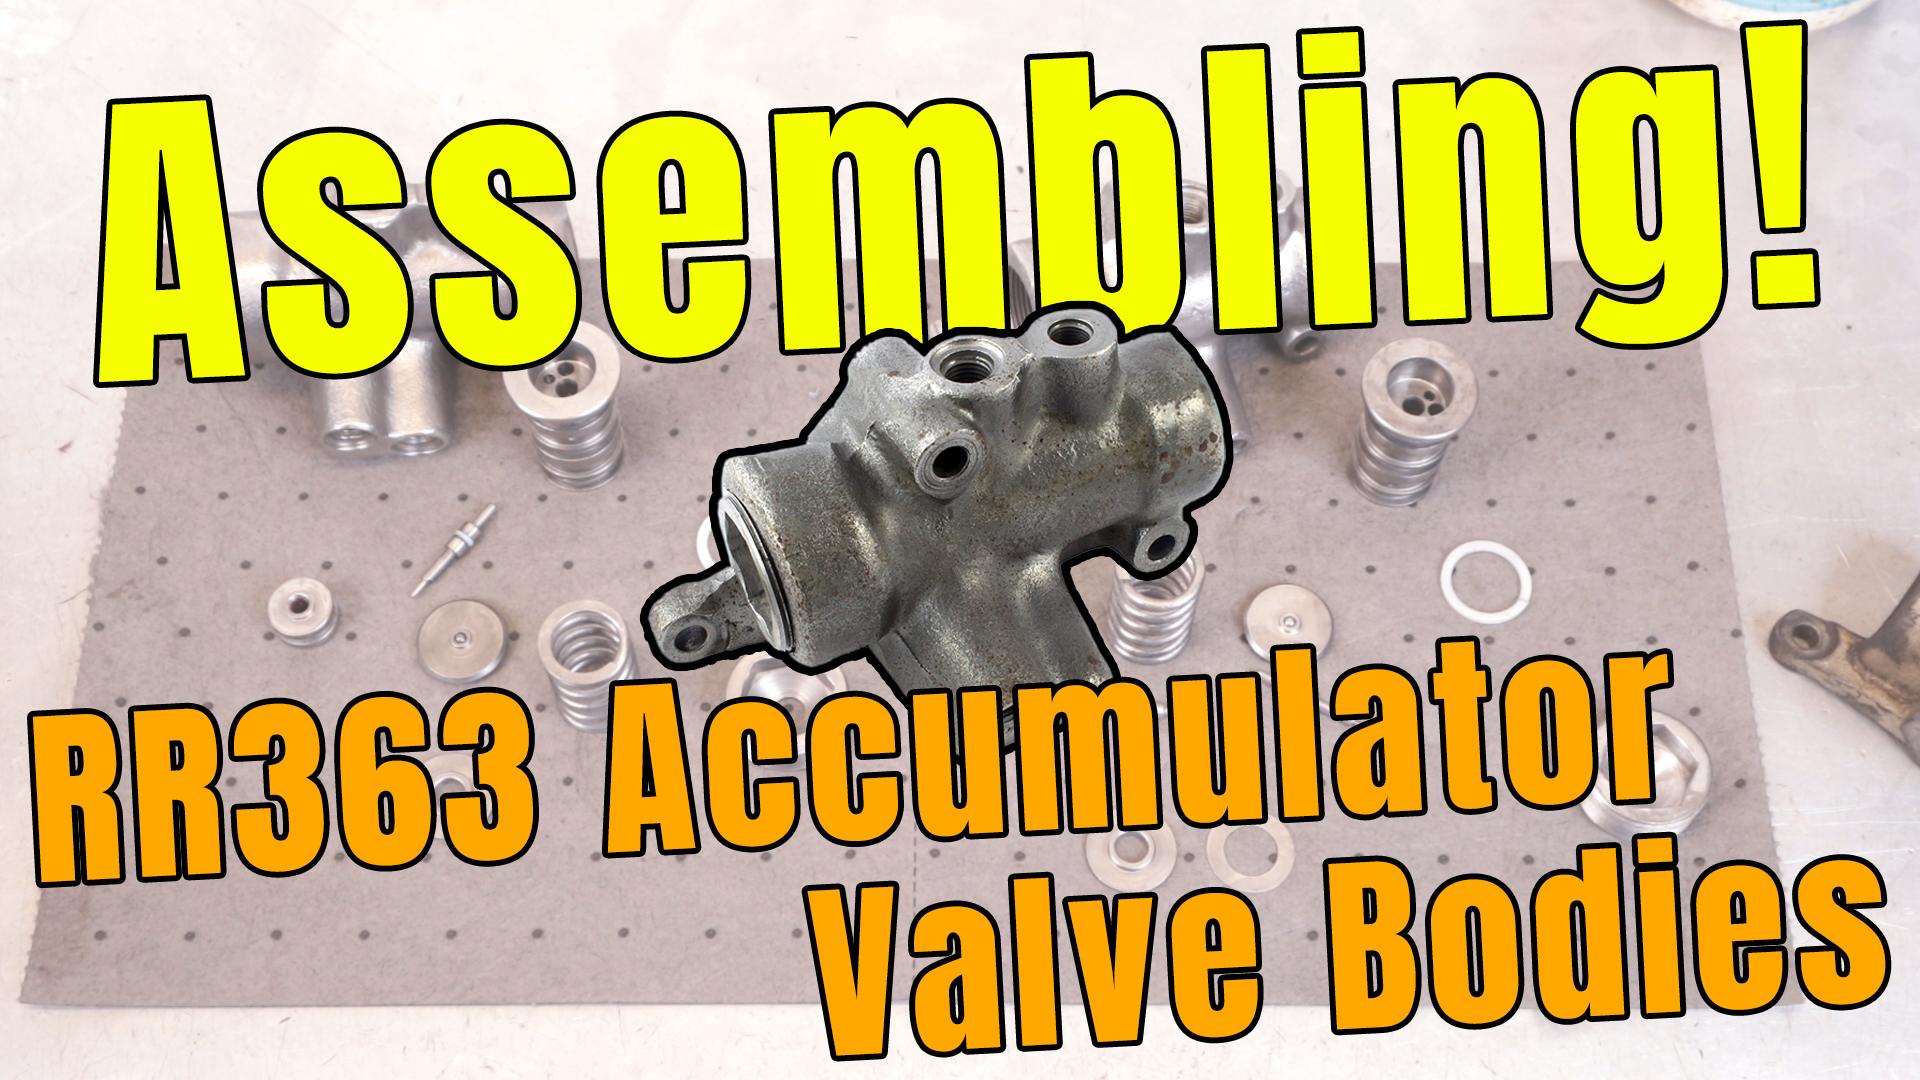 Assembling Accumulator Valve Bodies: A Must-know for Rolls-Royce and Bentley Owners